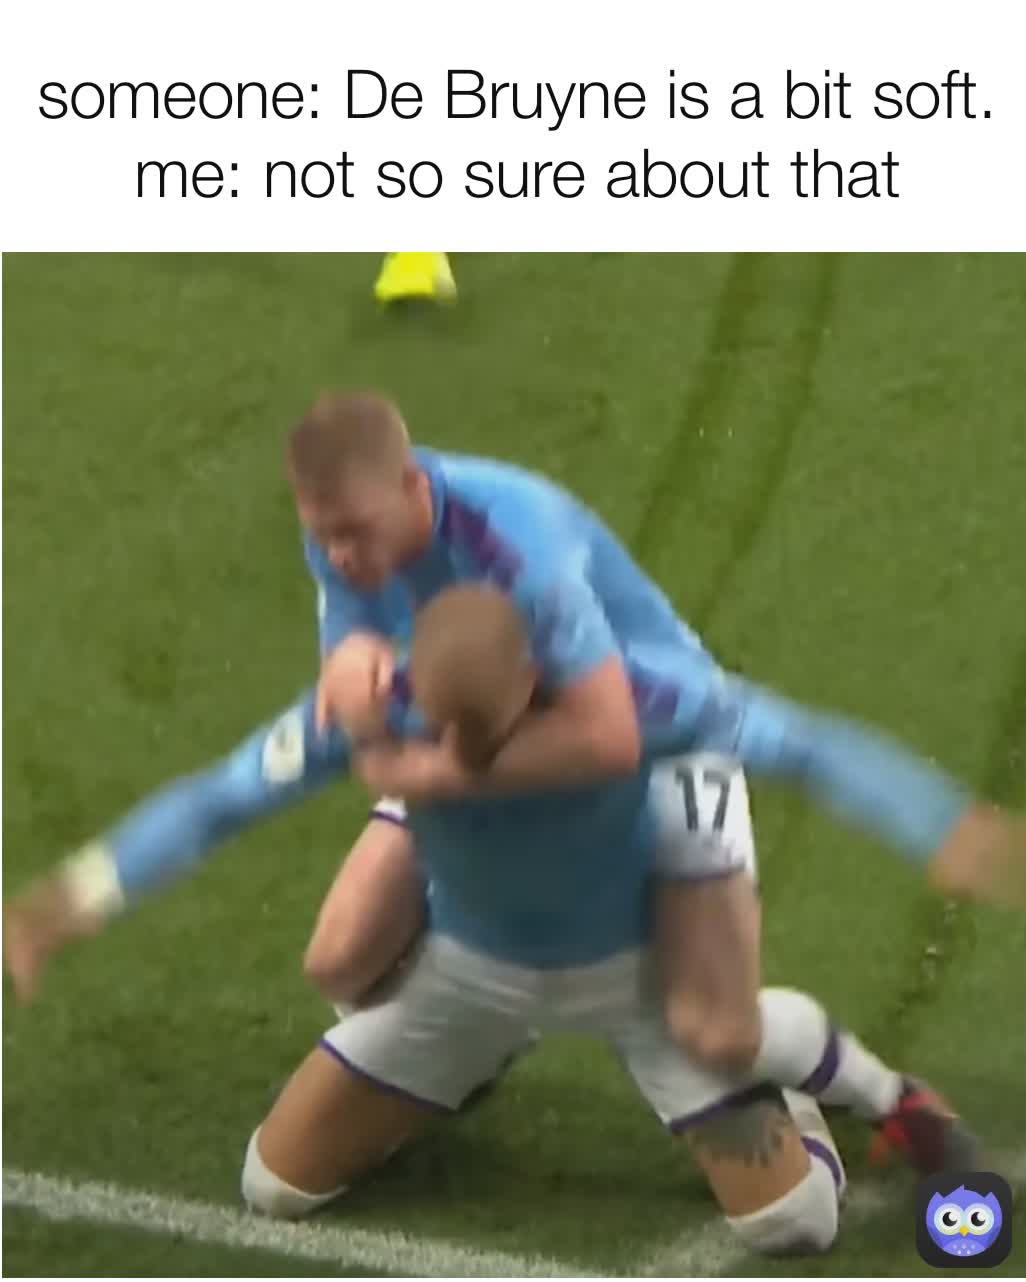 someone: De Bruyne is a bit soft.
me: not so sure about that